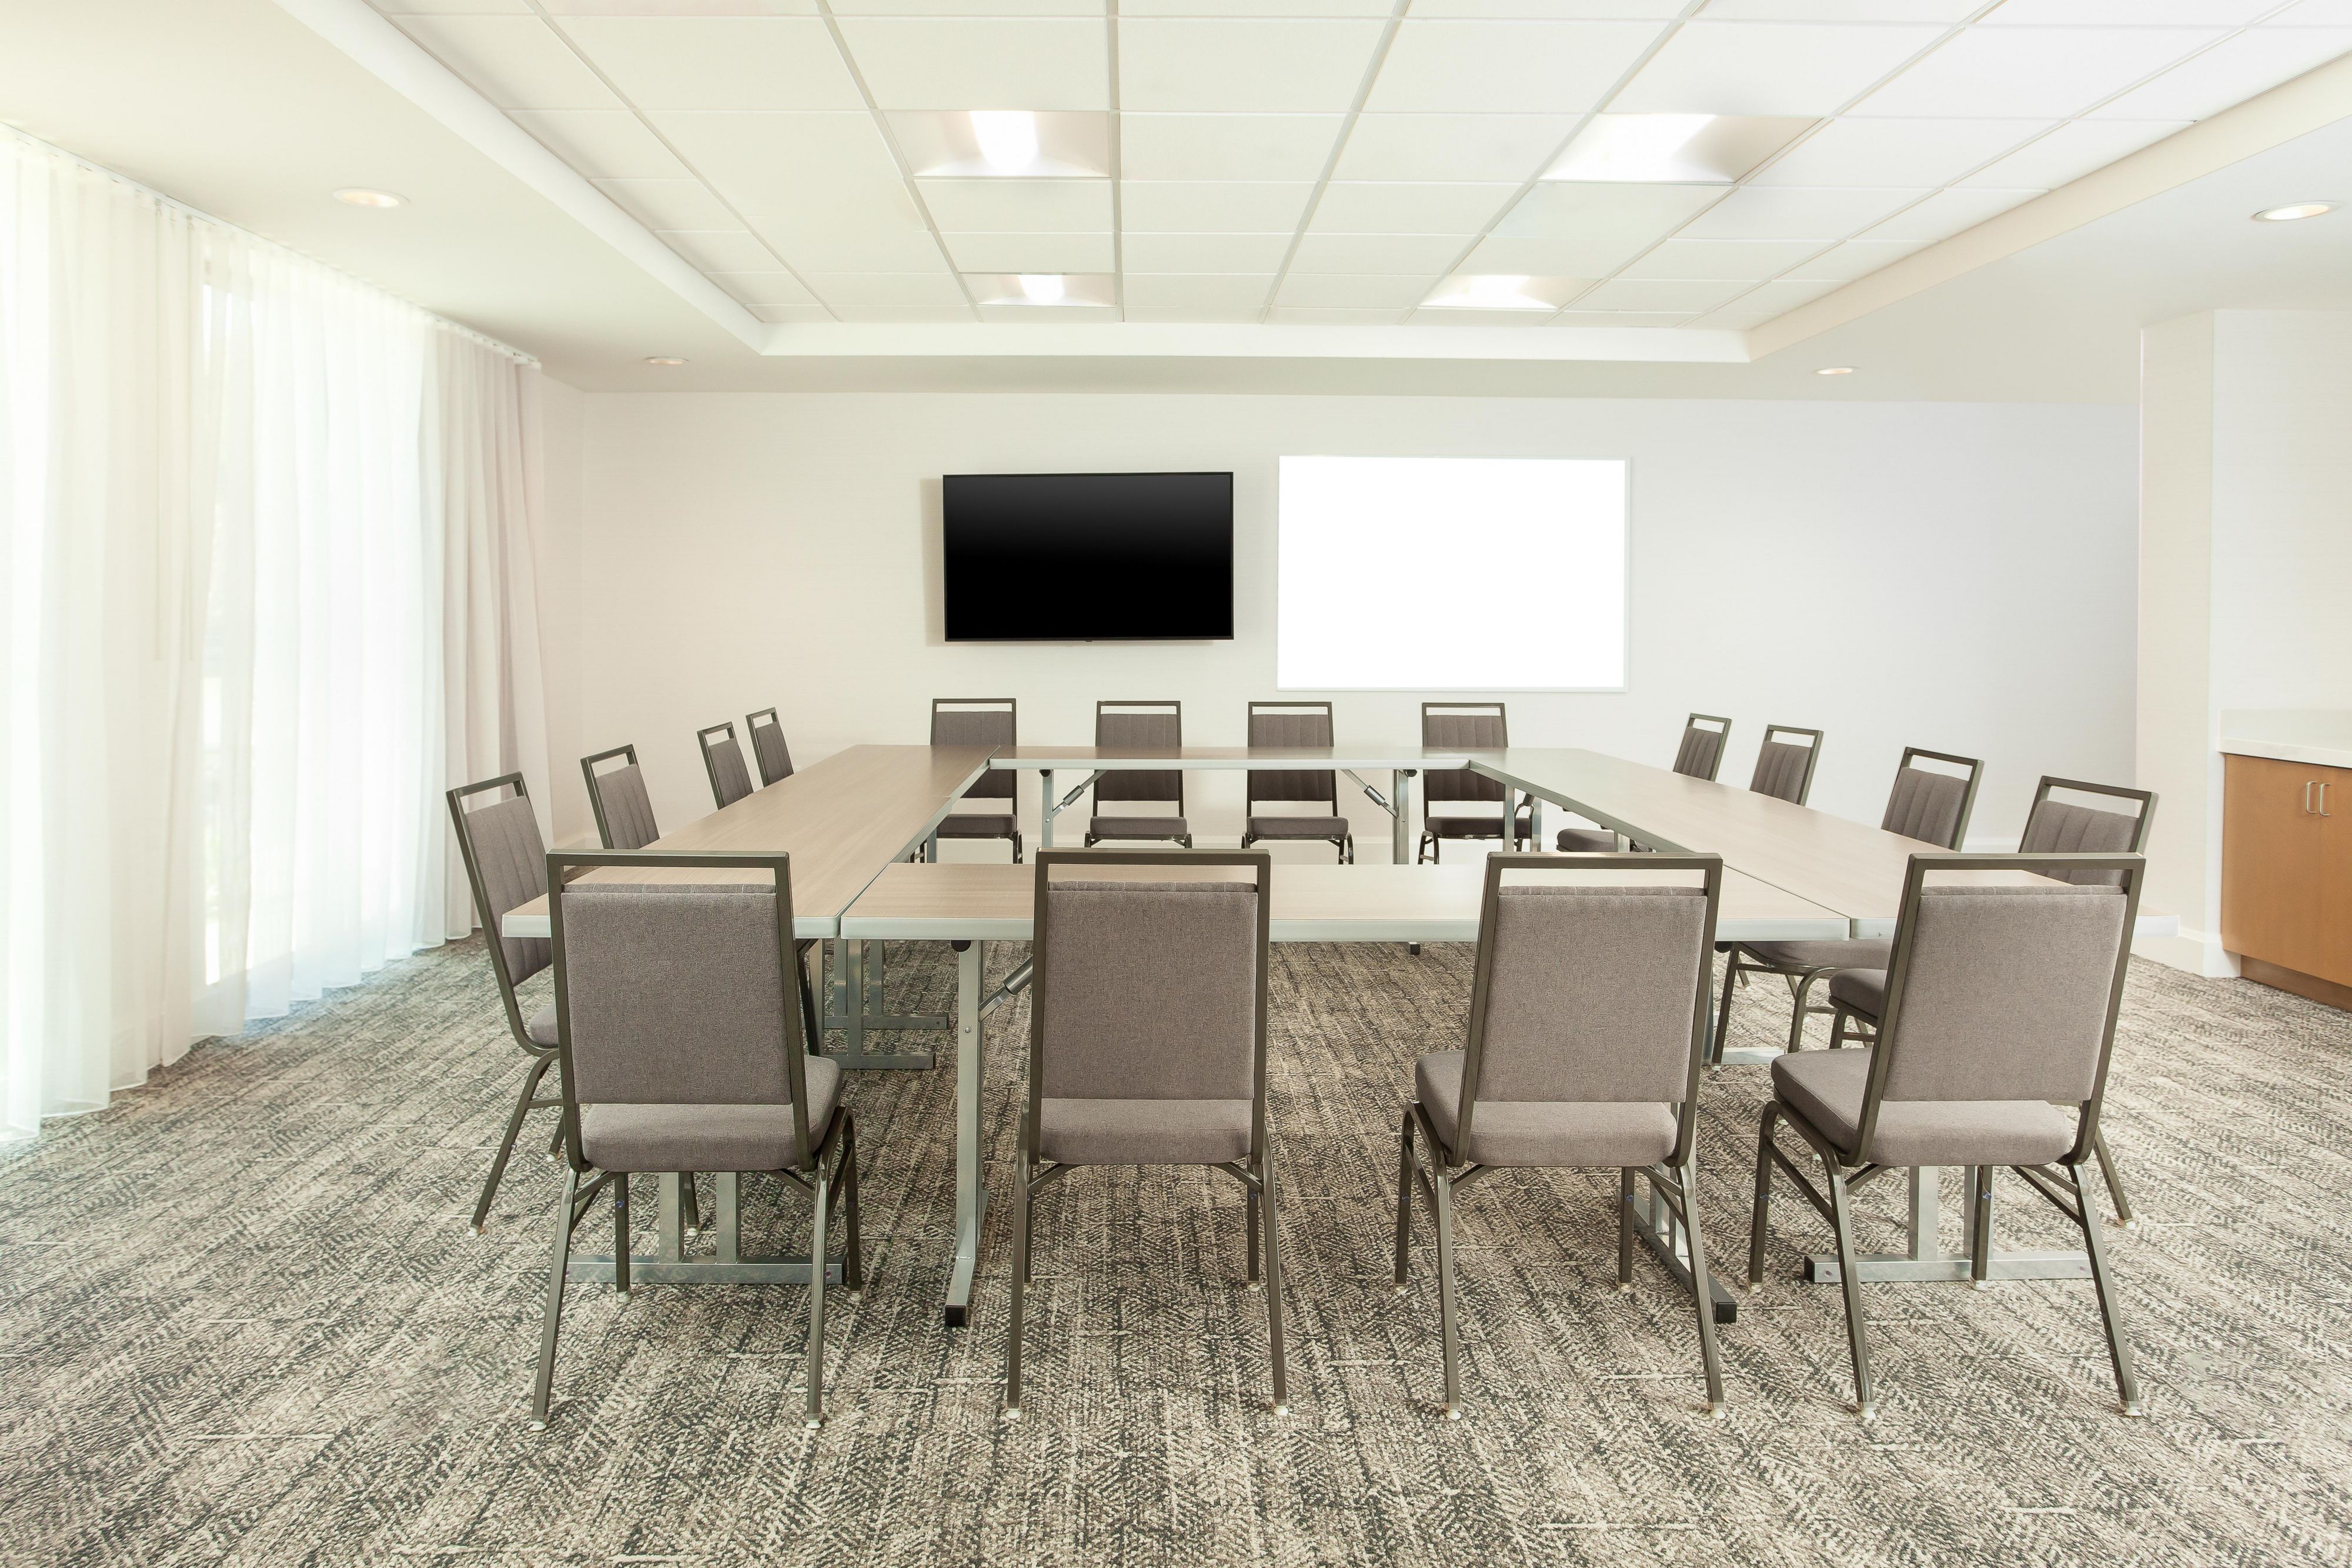 With over 650 square feet of flexible, stylish meeting space, we can host any kind of board meeting, social function, seminar or training with personalized 
attention.  We would love to help make your next meeting or event in the San Bernardino-Loma Linda area a success!